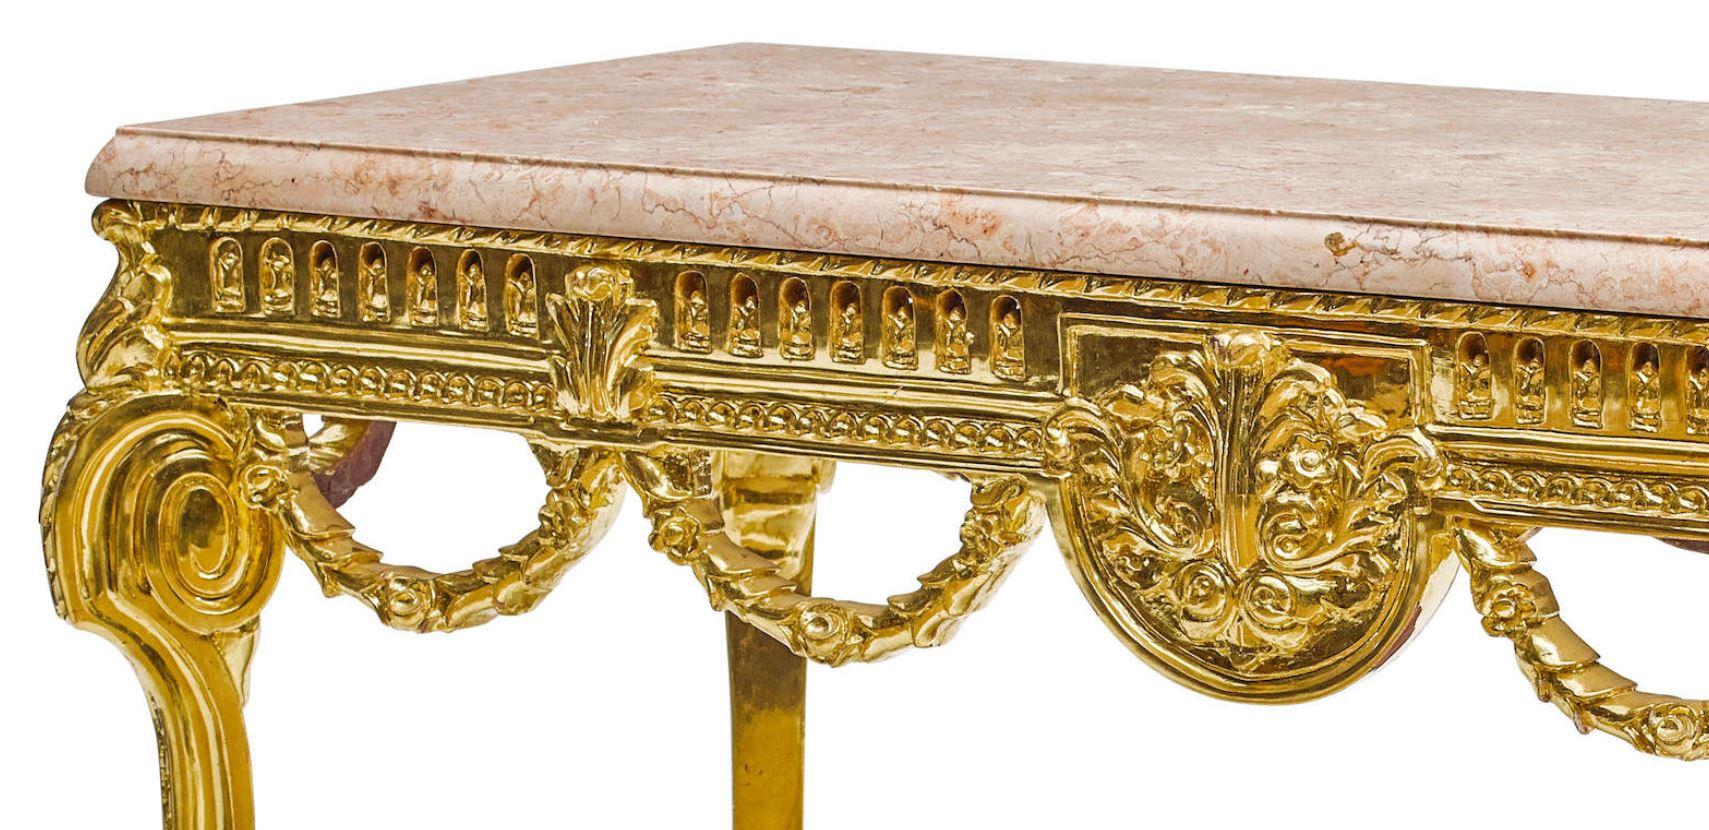 Exquisite French Louis XVI style carved gold leafed console table with marble top.
20th century. 

Thick rectangular moulded marble top over a foliate-inspired 23-karat gold leafed carved giltwood frieze, trimmed with a guilloche and decorated